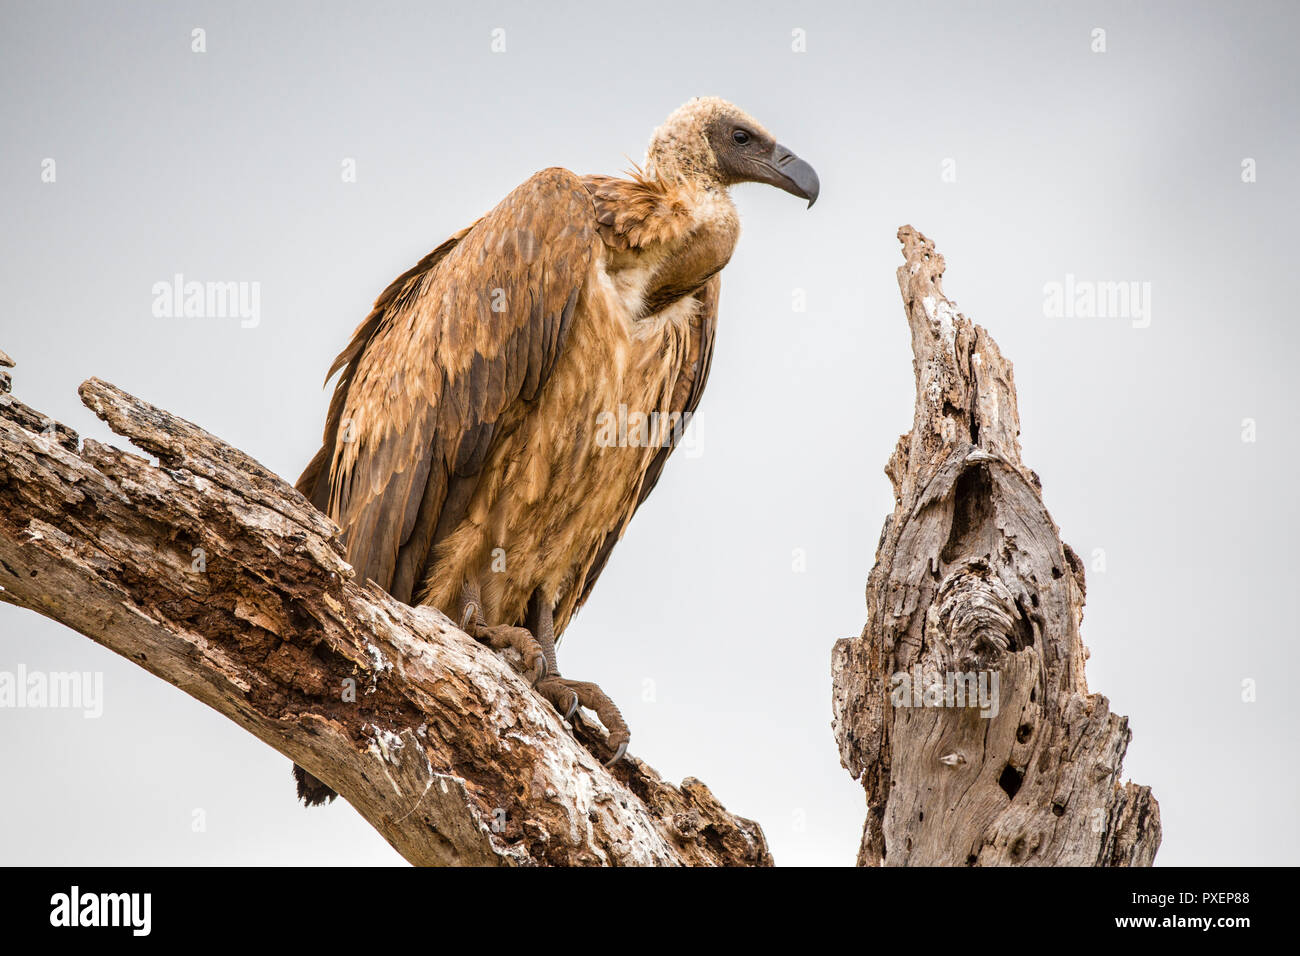 Ruppell's griffon vulture scavenging on carcass at Serengeti National Park, Tanzania Stock Photo